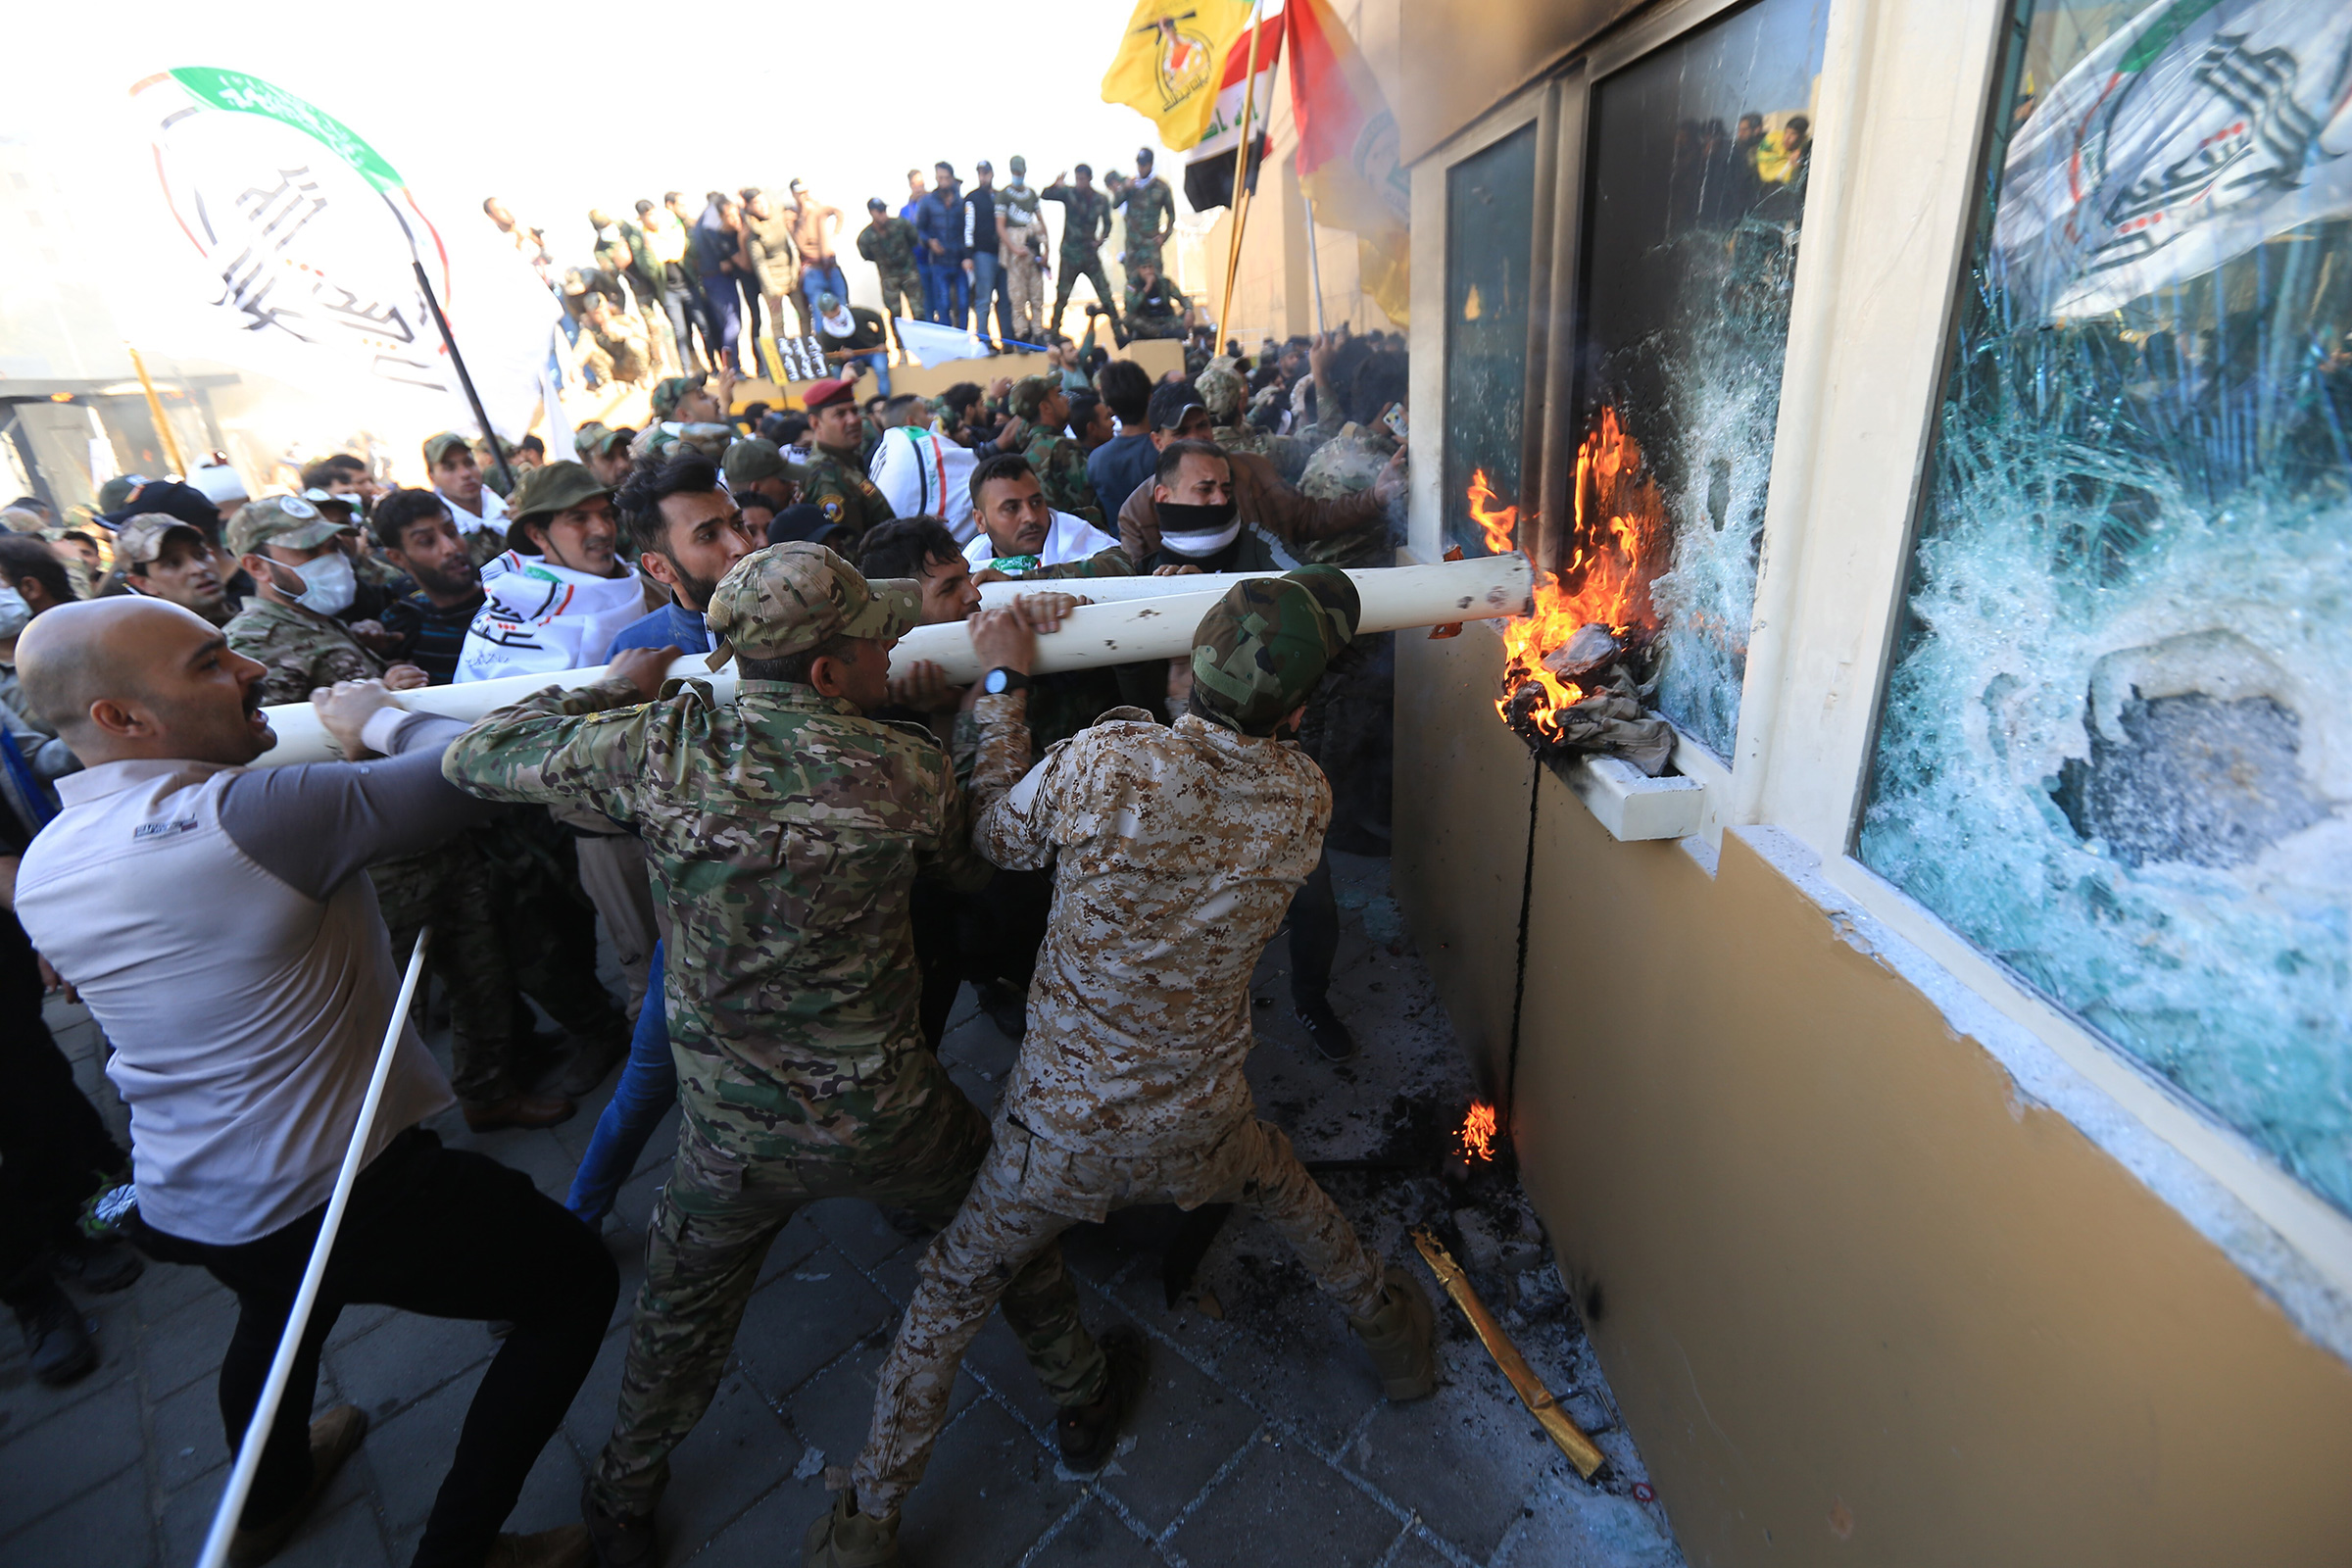 Iraqi protesters storm the U.S. embassy in Baghdad on Dec. 31, 2019.